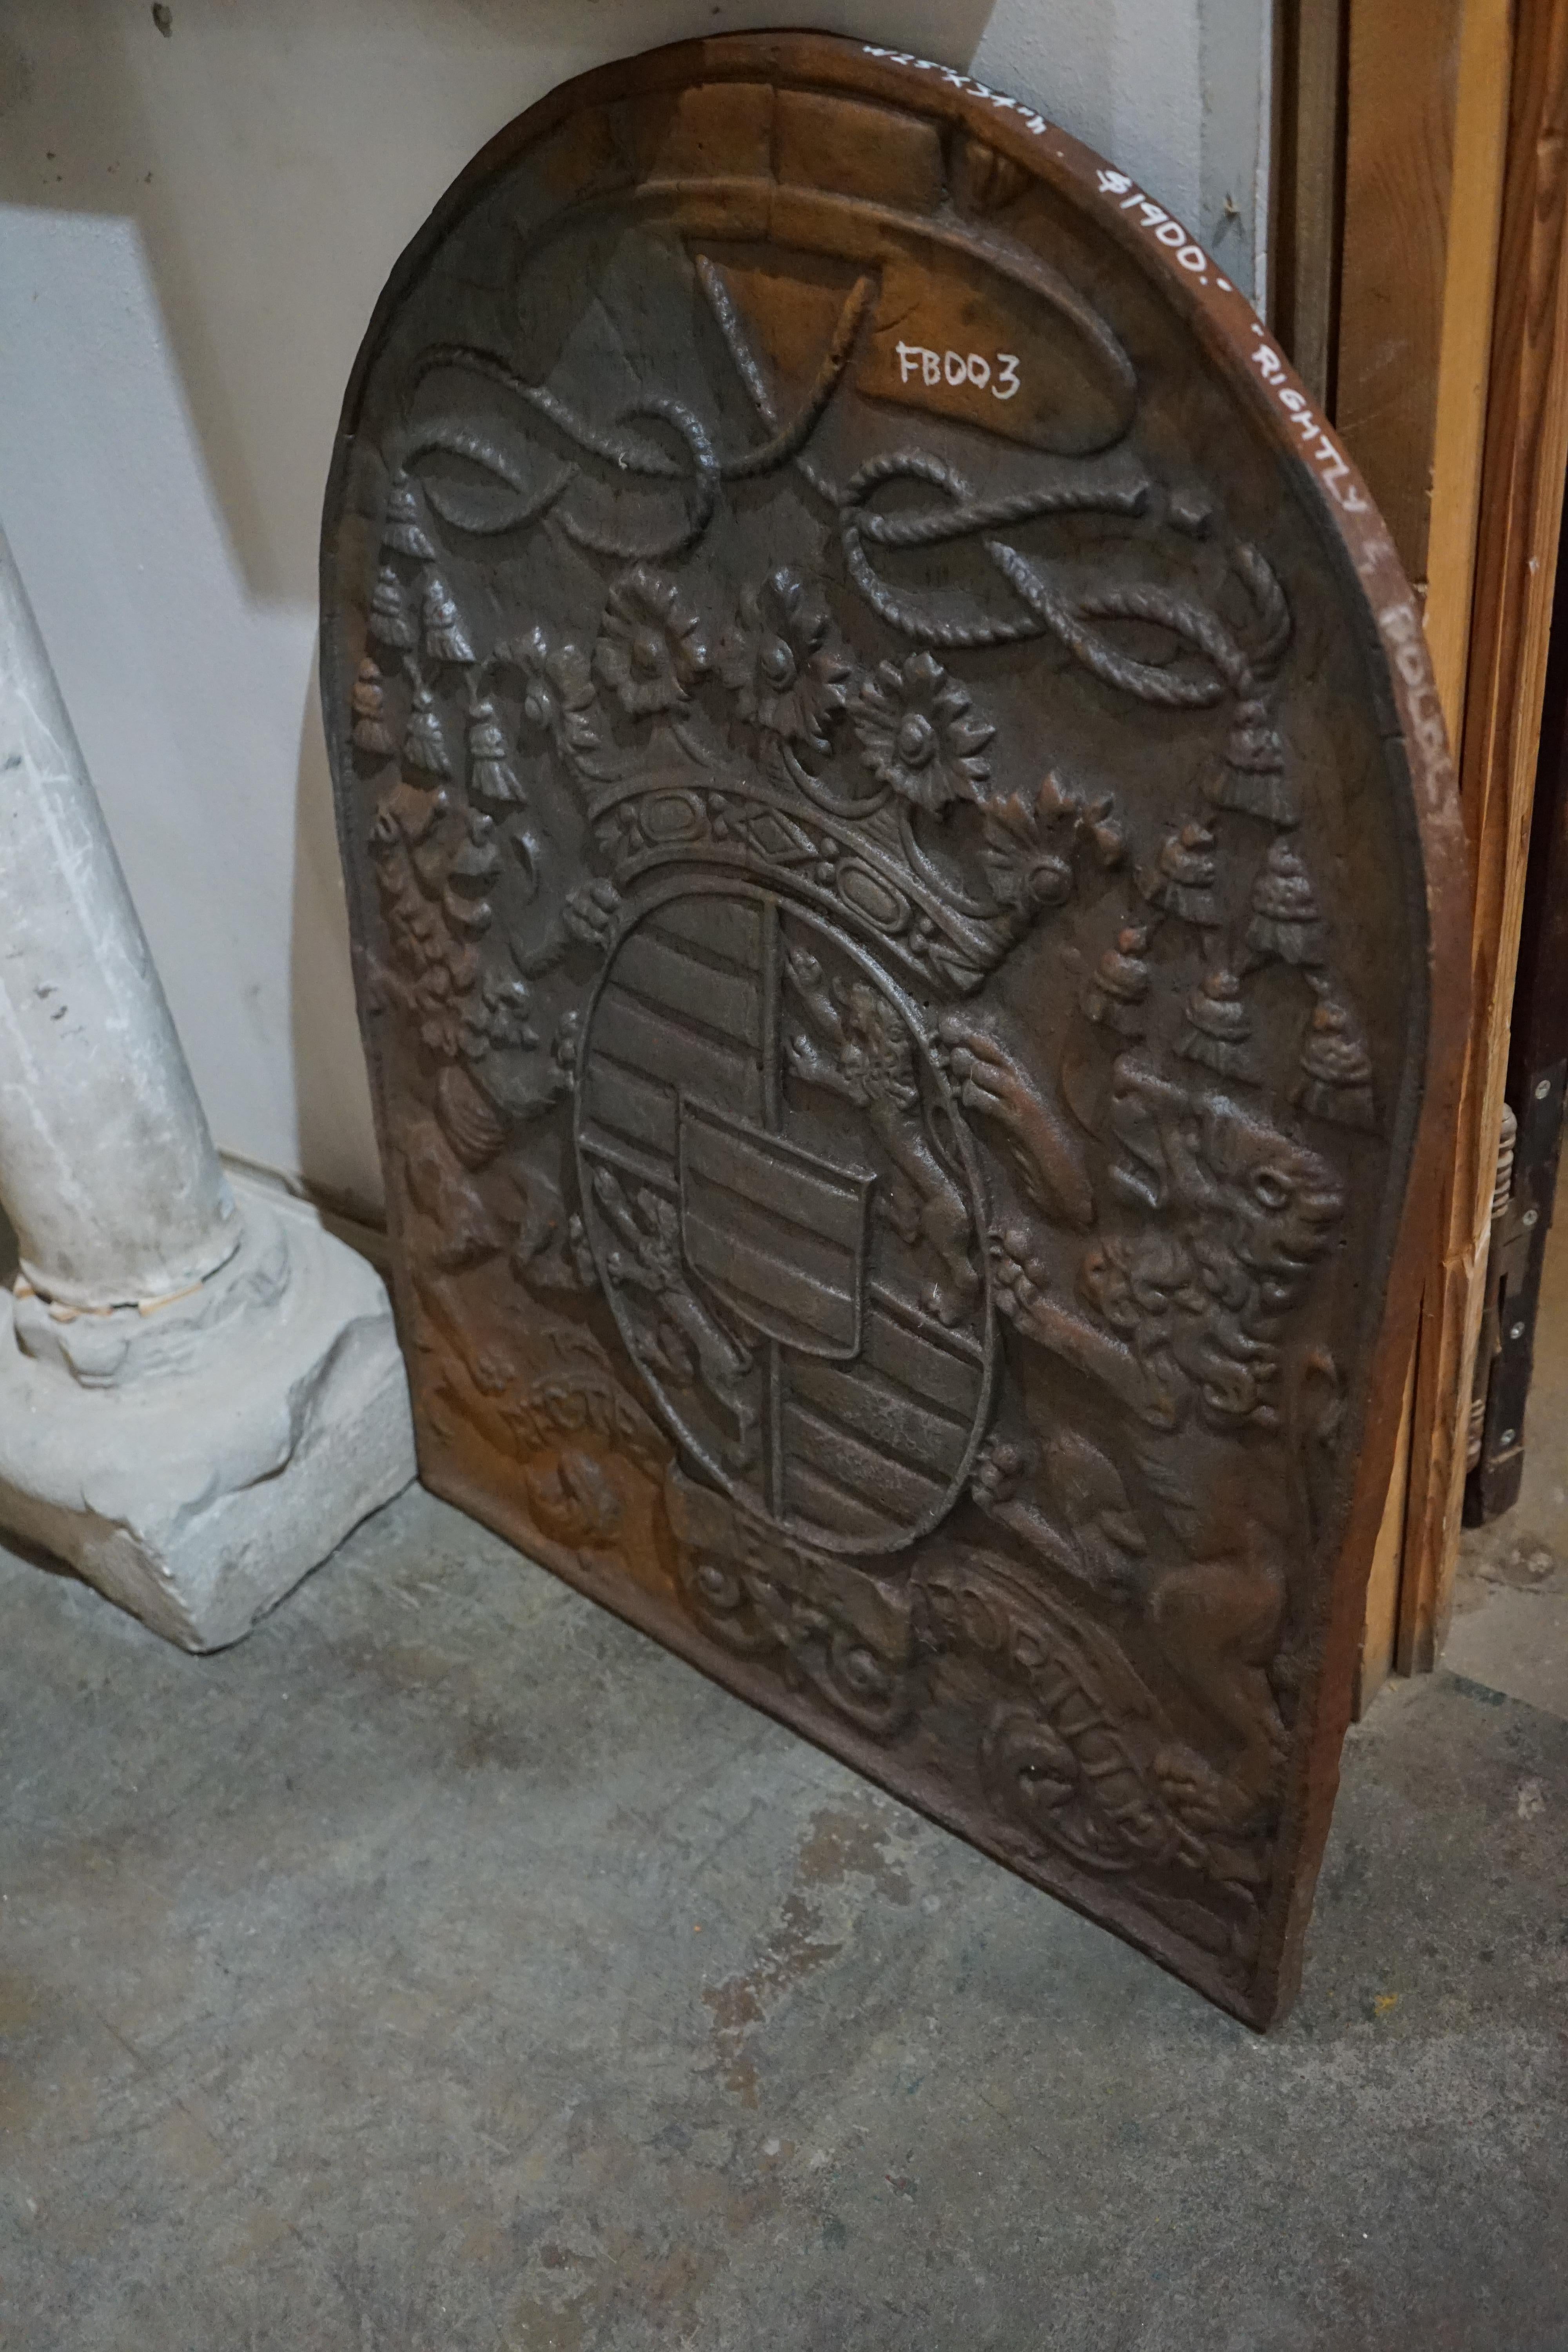 French Antique Fireback Depicting Royal Coat of Arms